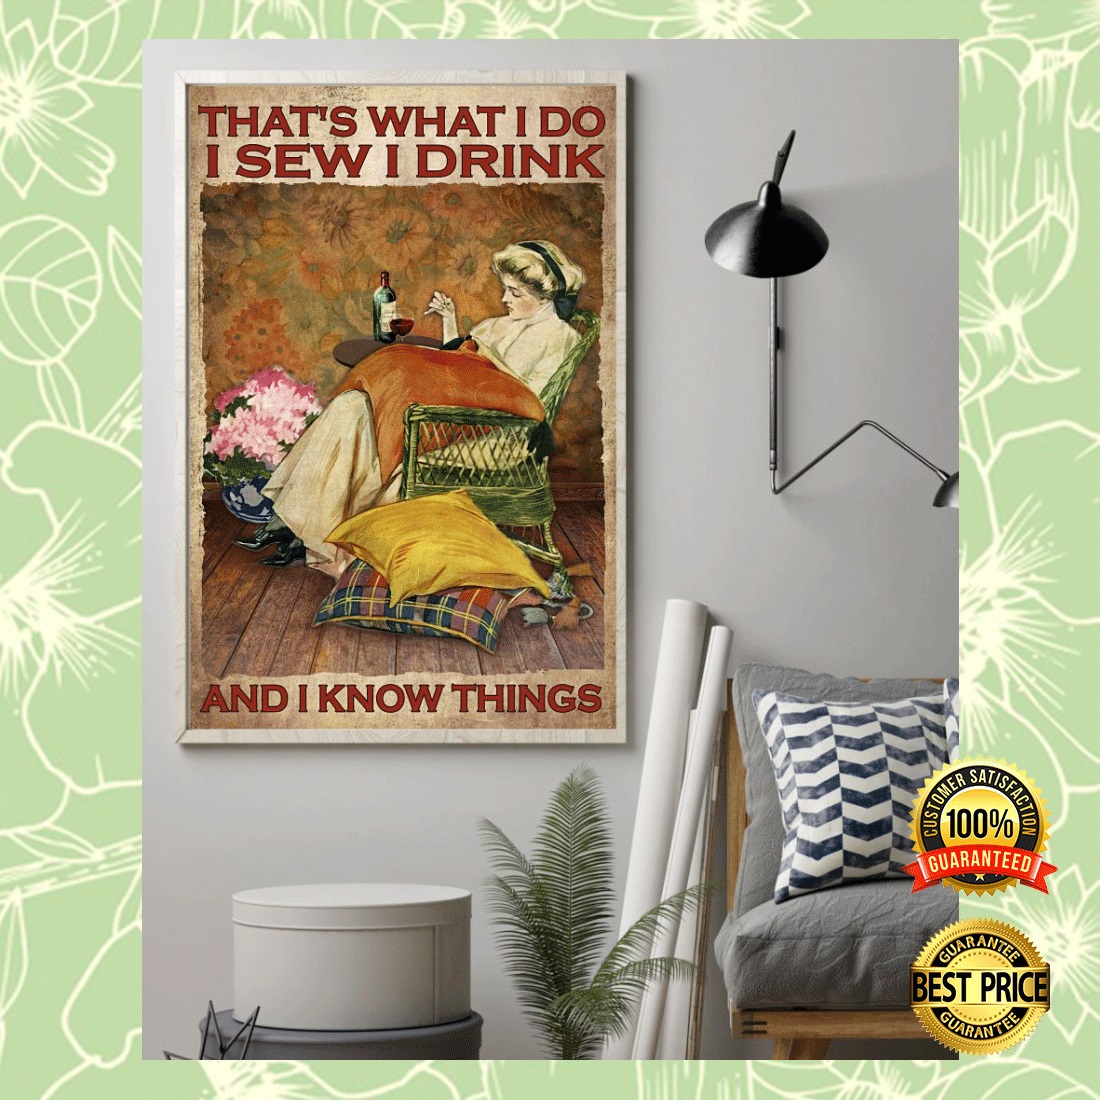 THAT'S WHAT I DO I SEW I DRINK AND I KNOW THINGS POSTER